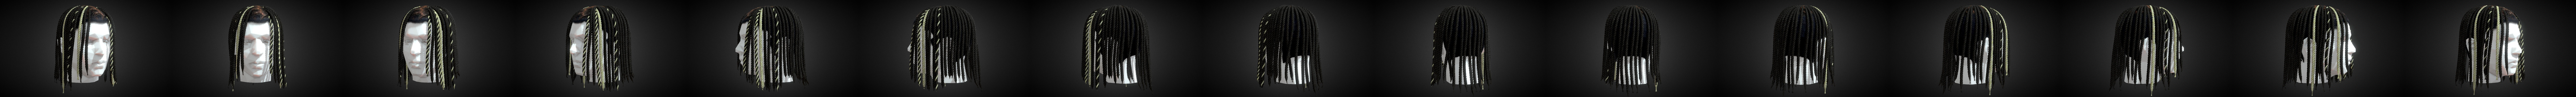 3D model King Von Medium Braided Dreads - Partly Bleached VR / AR /  low-poly